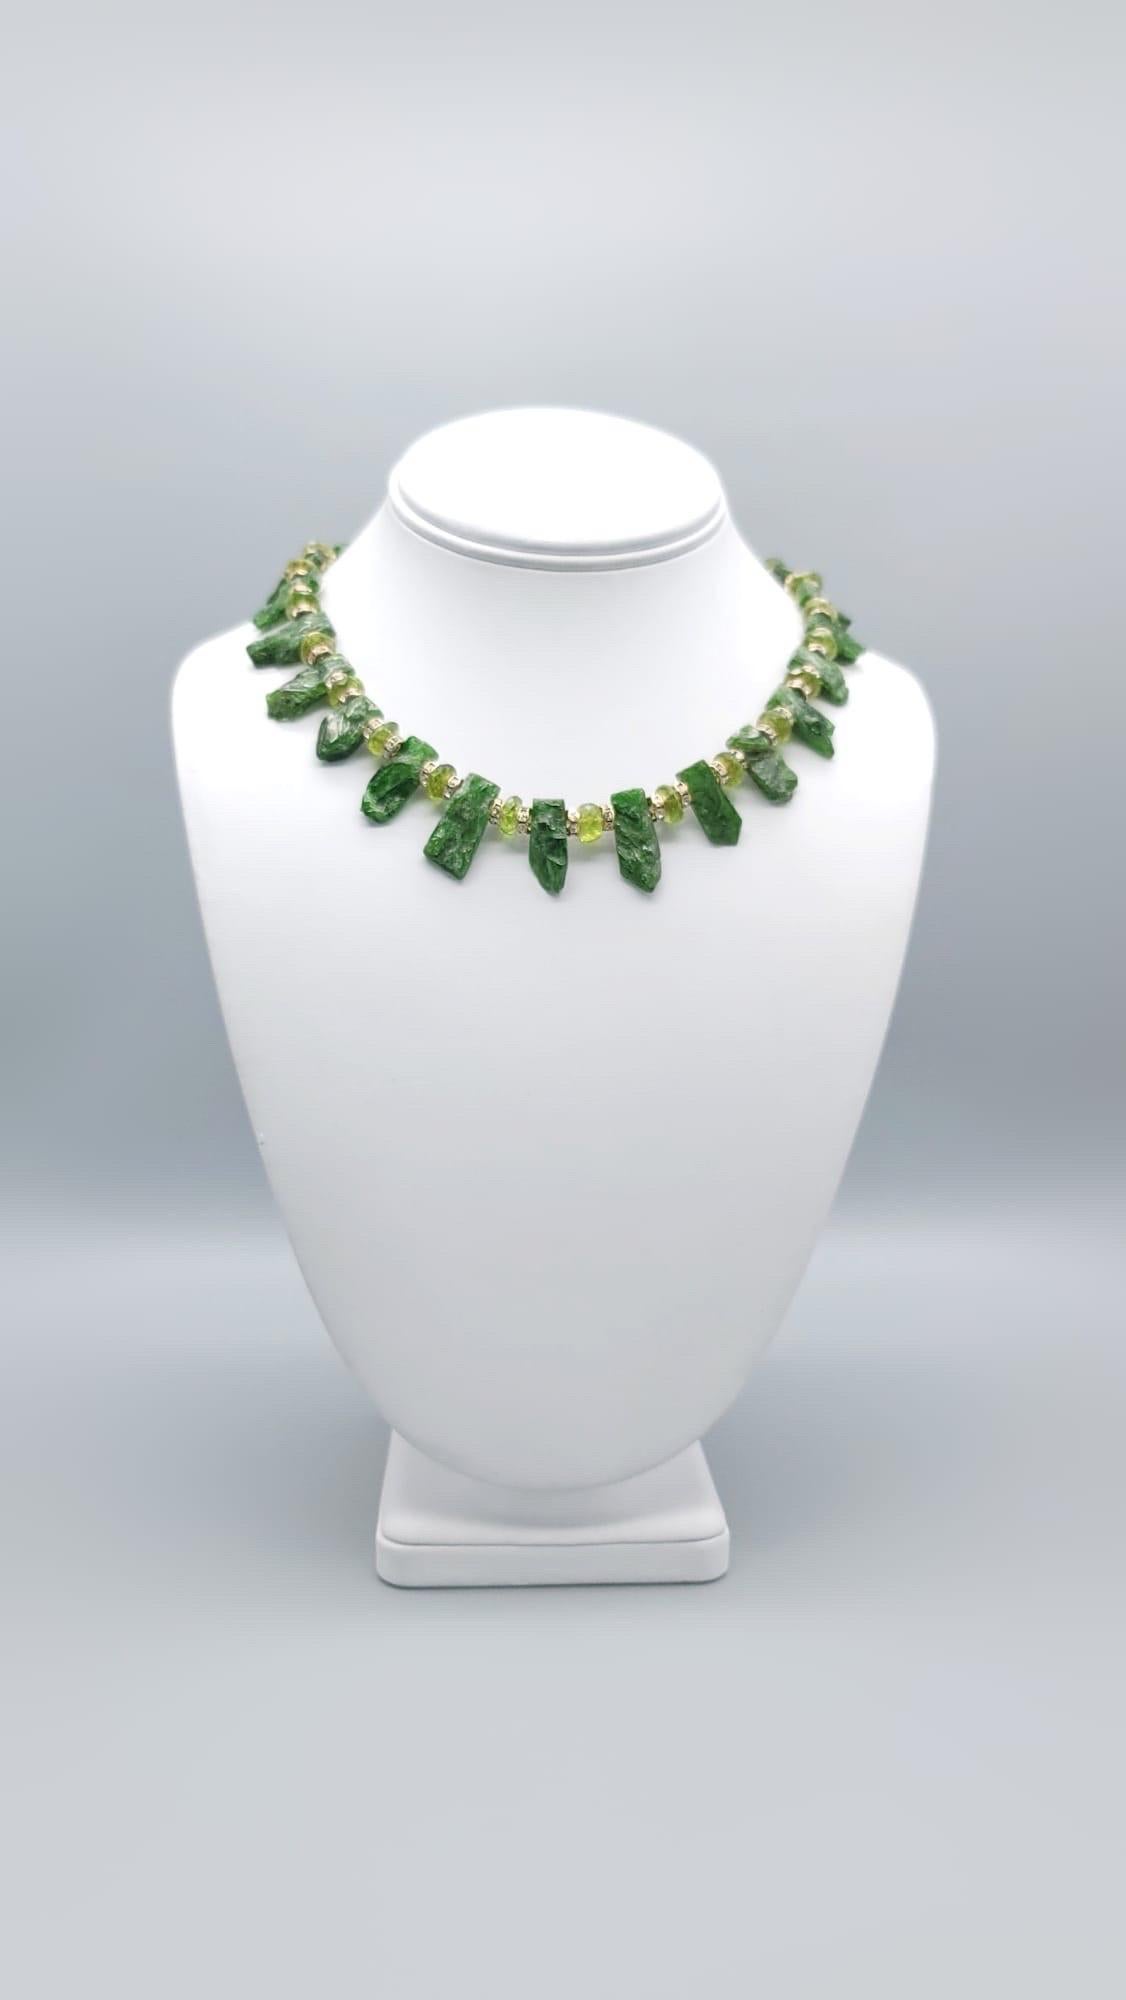 A.Jeschel Gorgeous necklace green Chrome Diopside paired with Peridot  For Sale 9